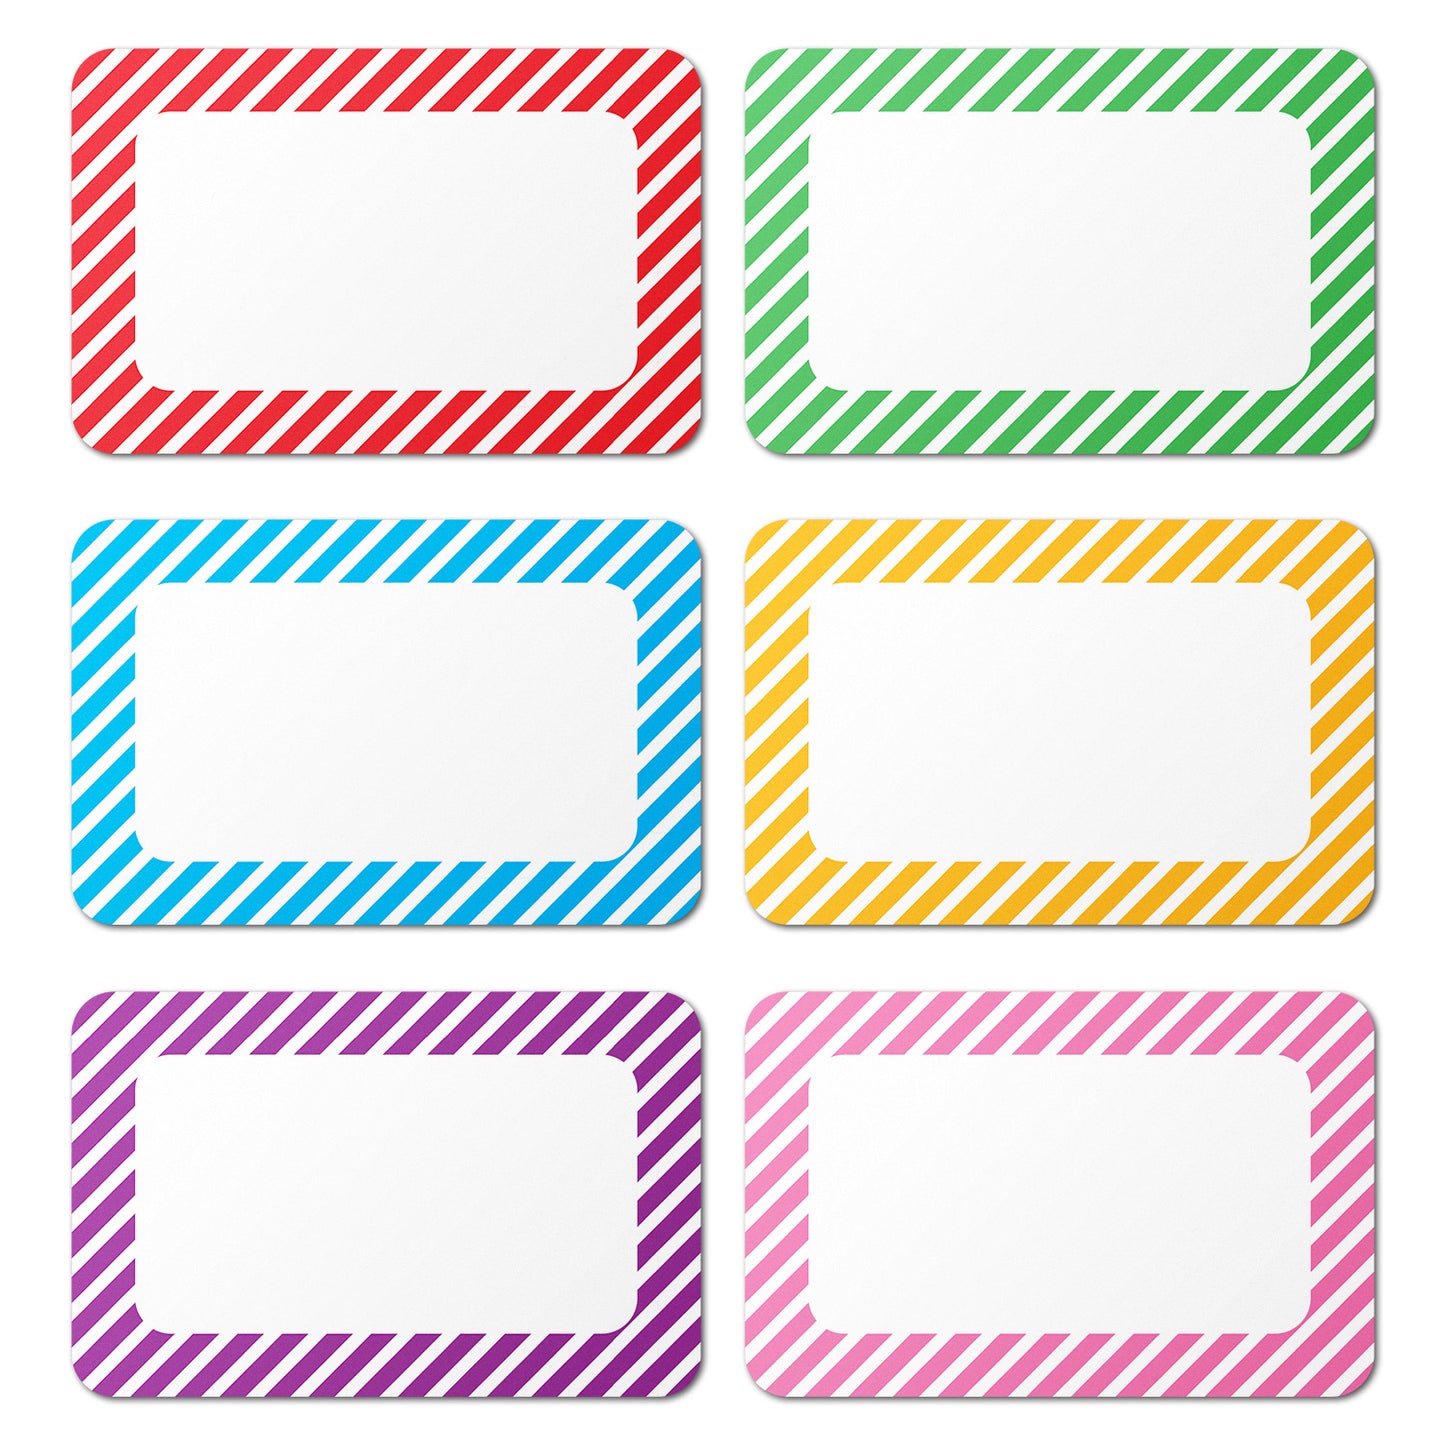 3.5 x 2.25 inch | Name Tags: Stripped Border Write-in Name Tags (6-Colors)